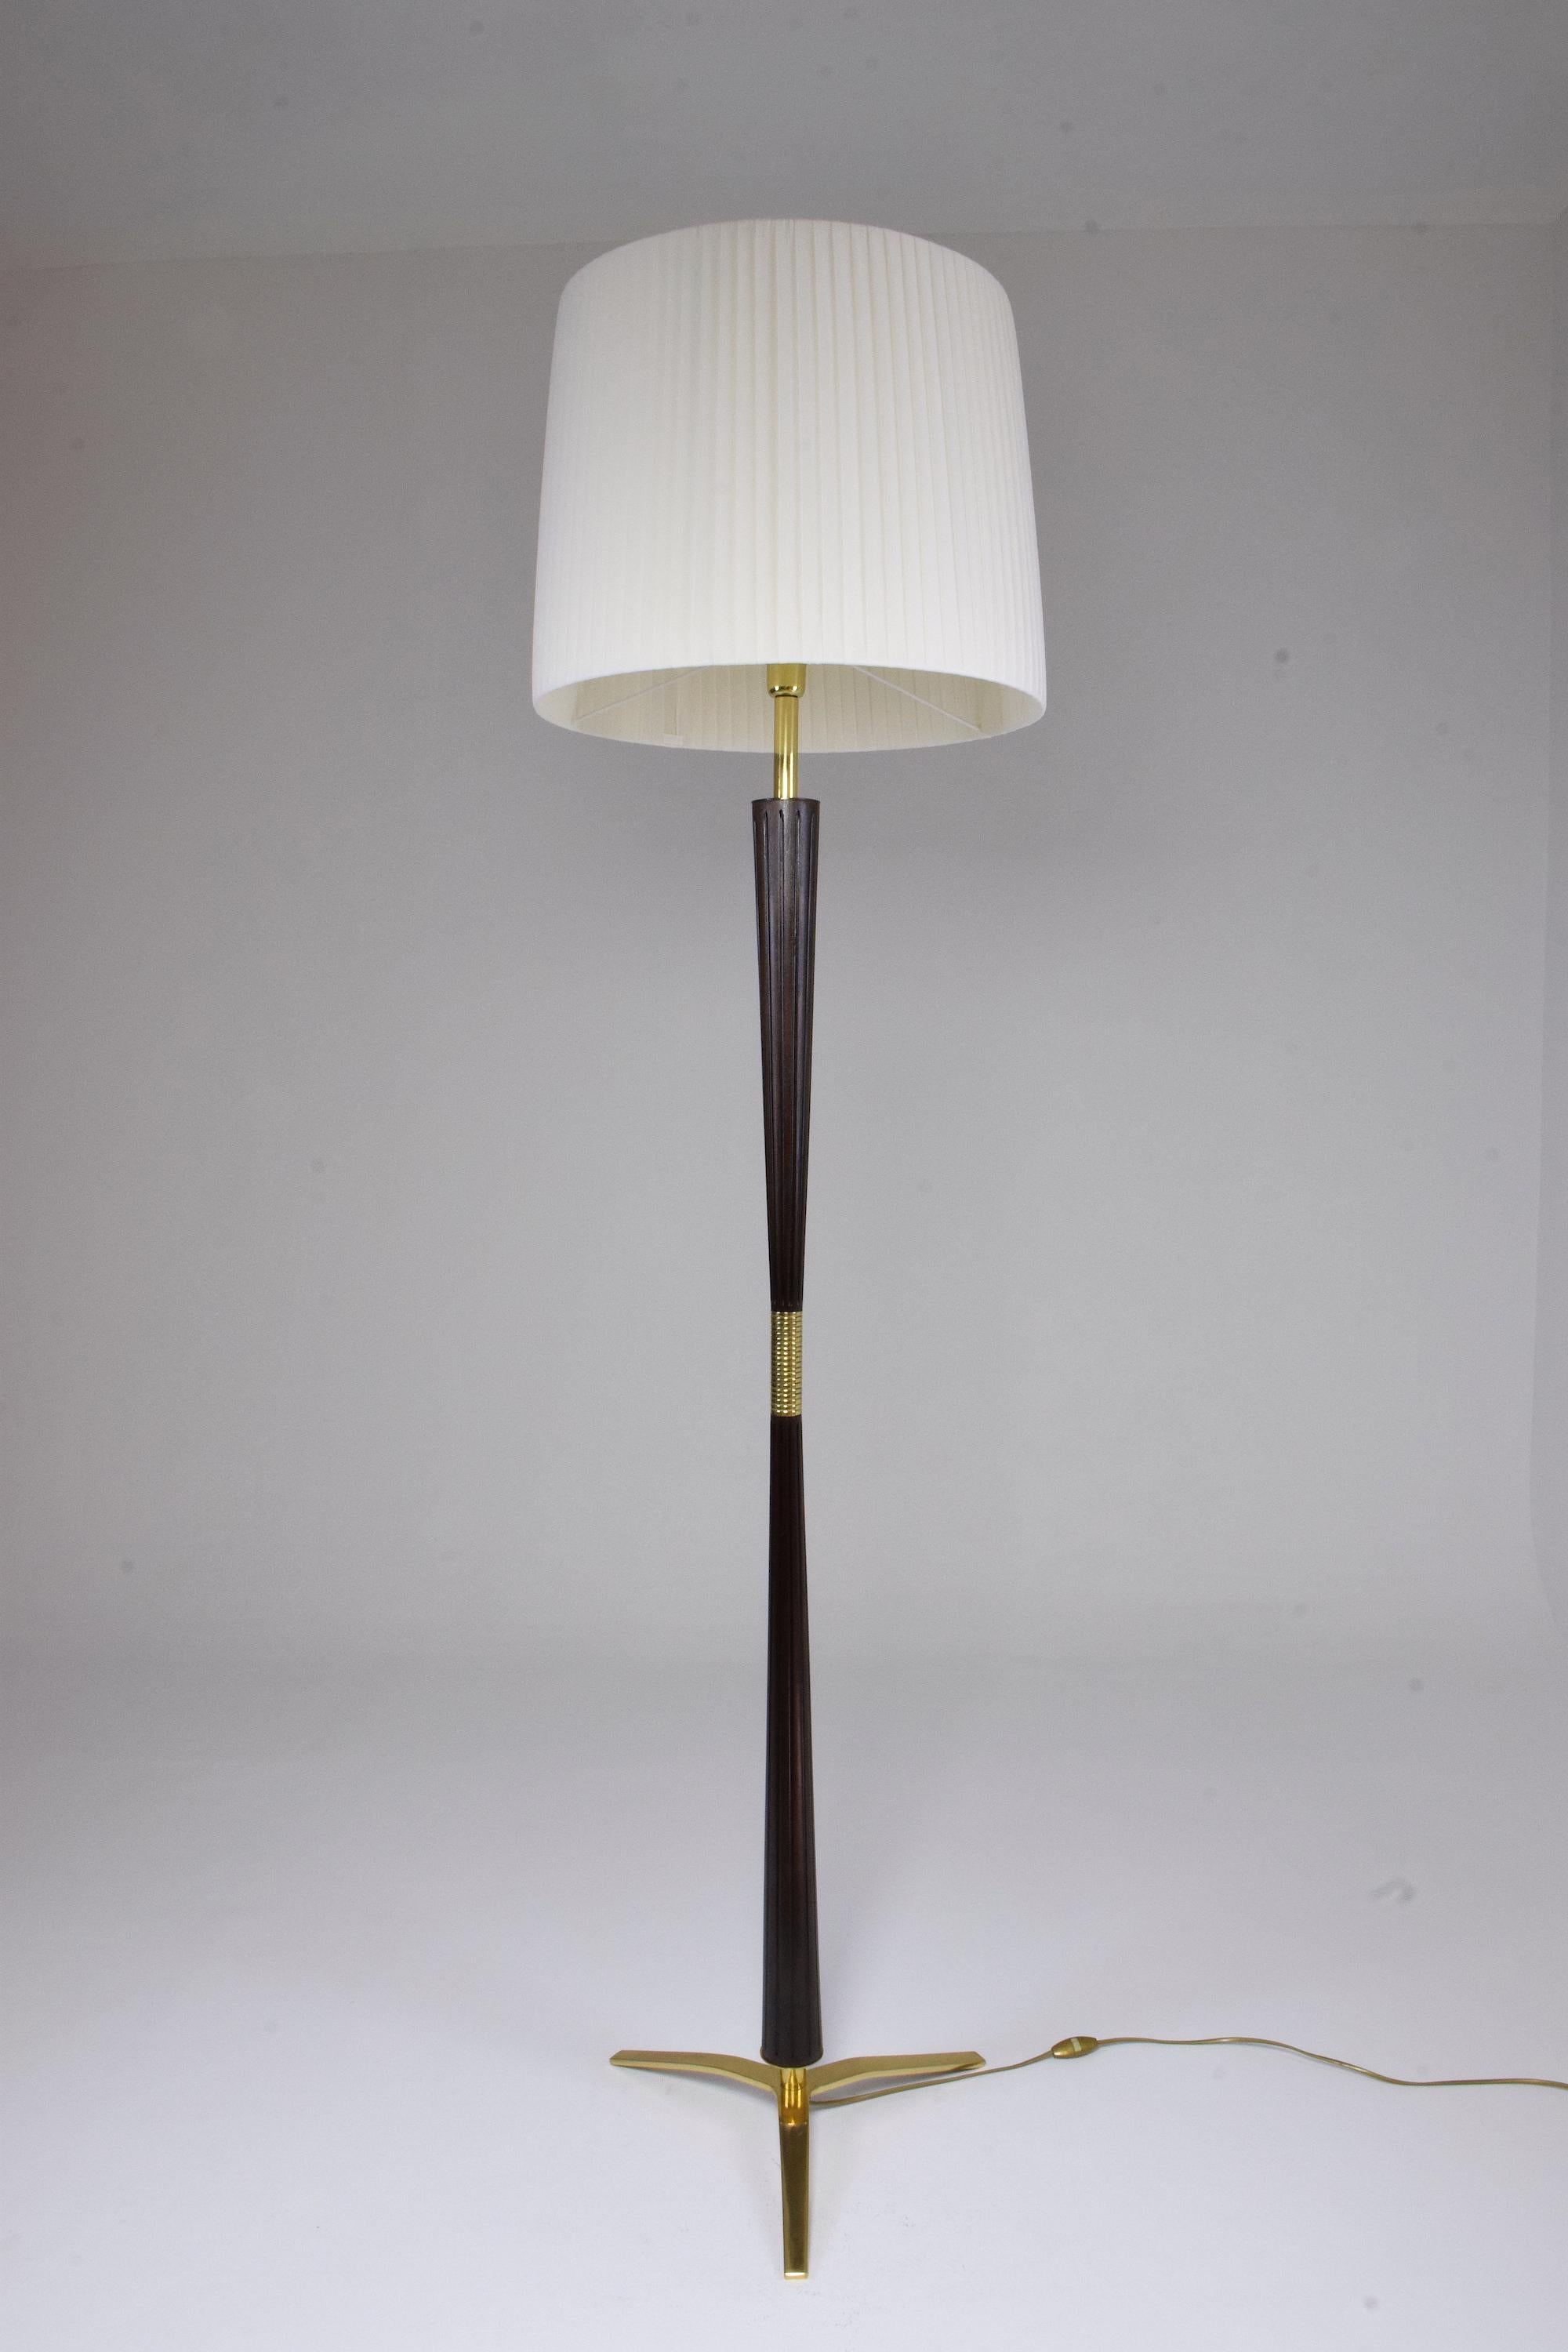 Majestic 20th century vintage floor lamp by notable lighting manufacturing company Stilnovo circa 1950s-1960s designed in solid carved mahogany, brass details, and base.
Professionally rewired and in fully restored condition with a new white soft